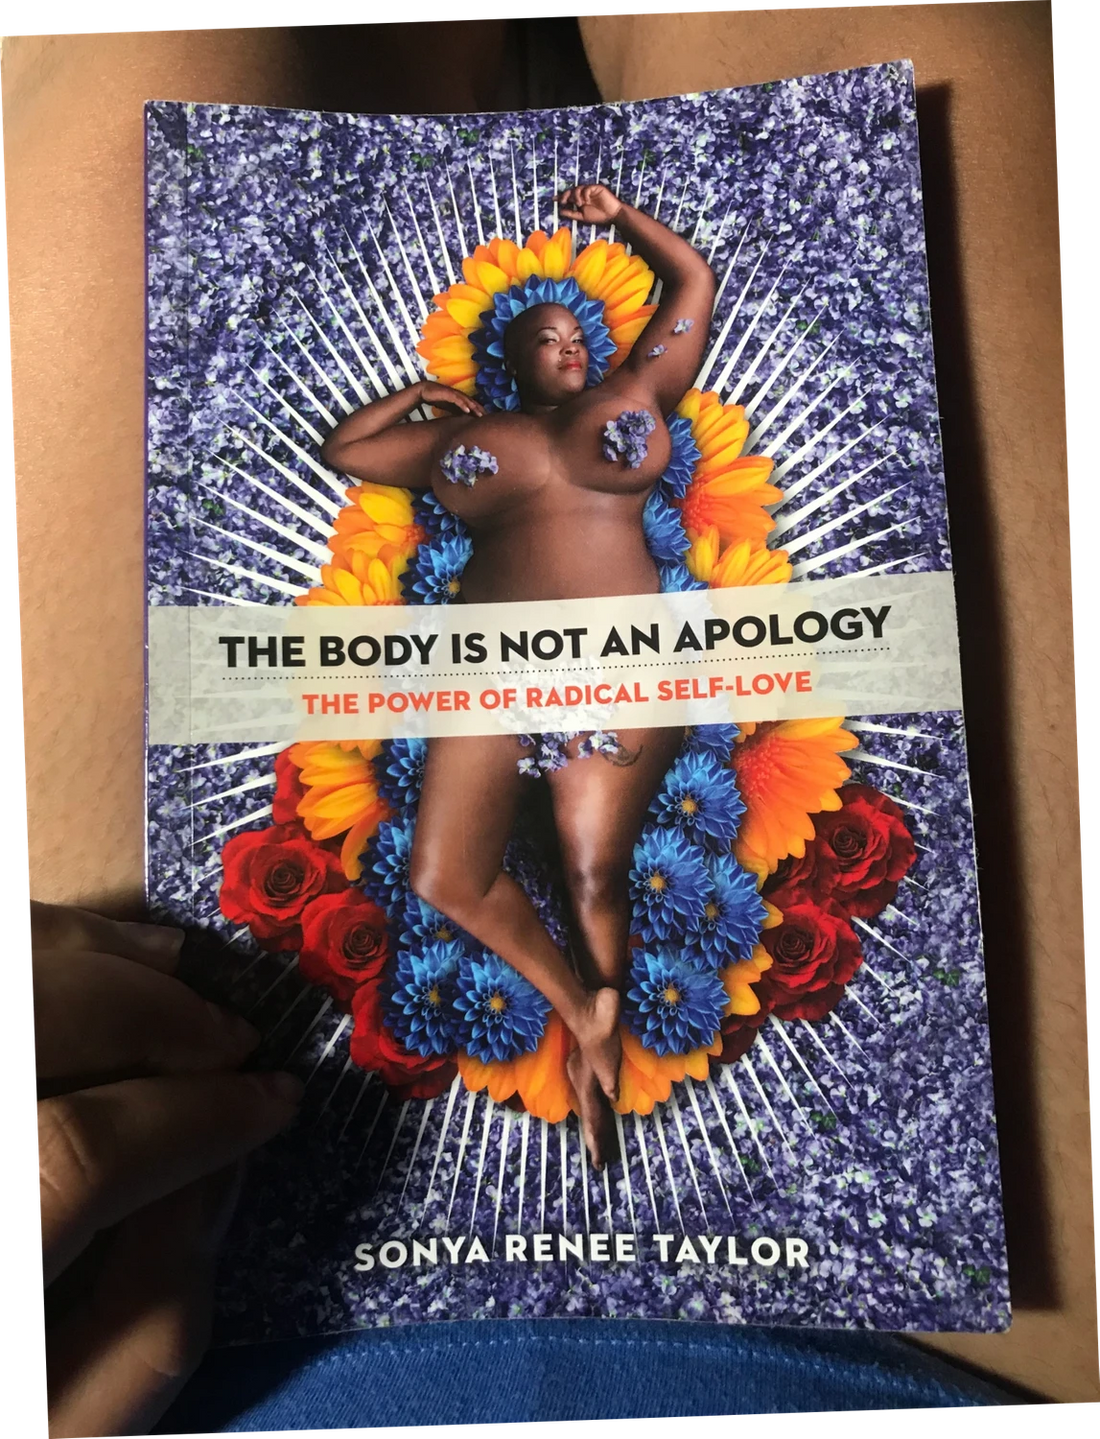 Reading: "The Body is Not an Apology"